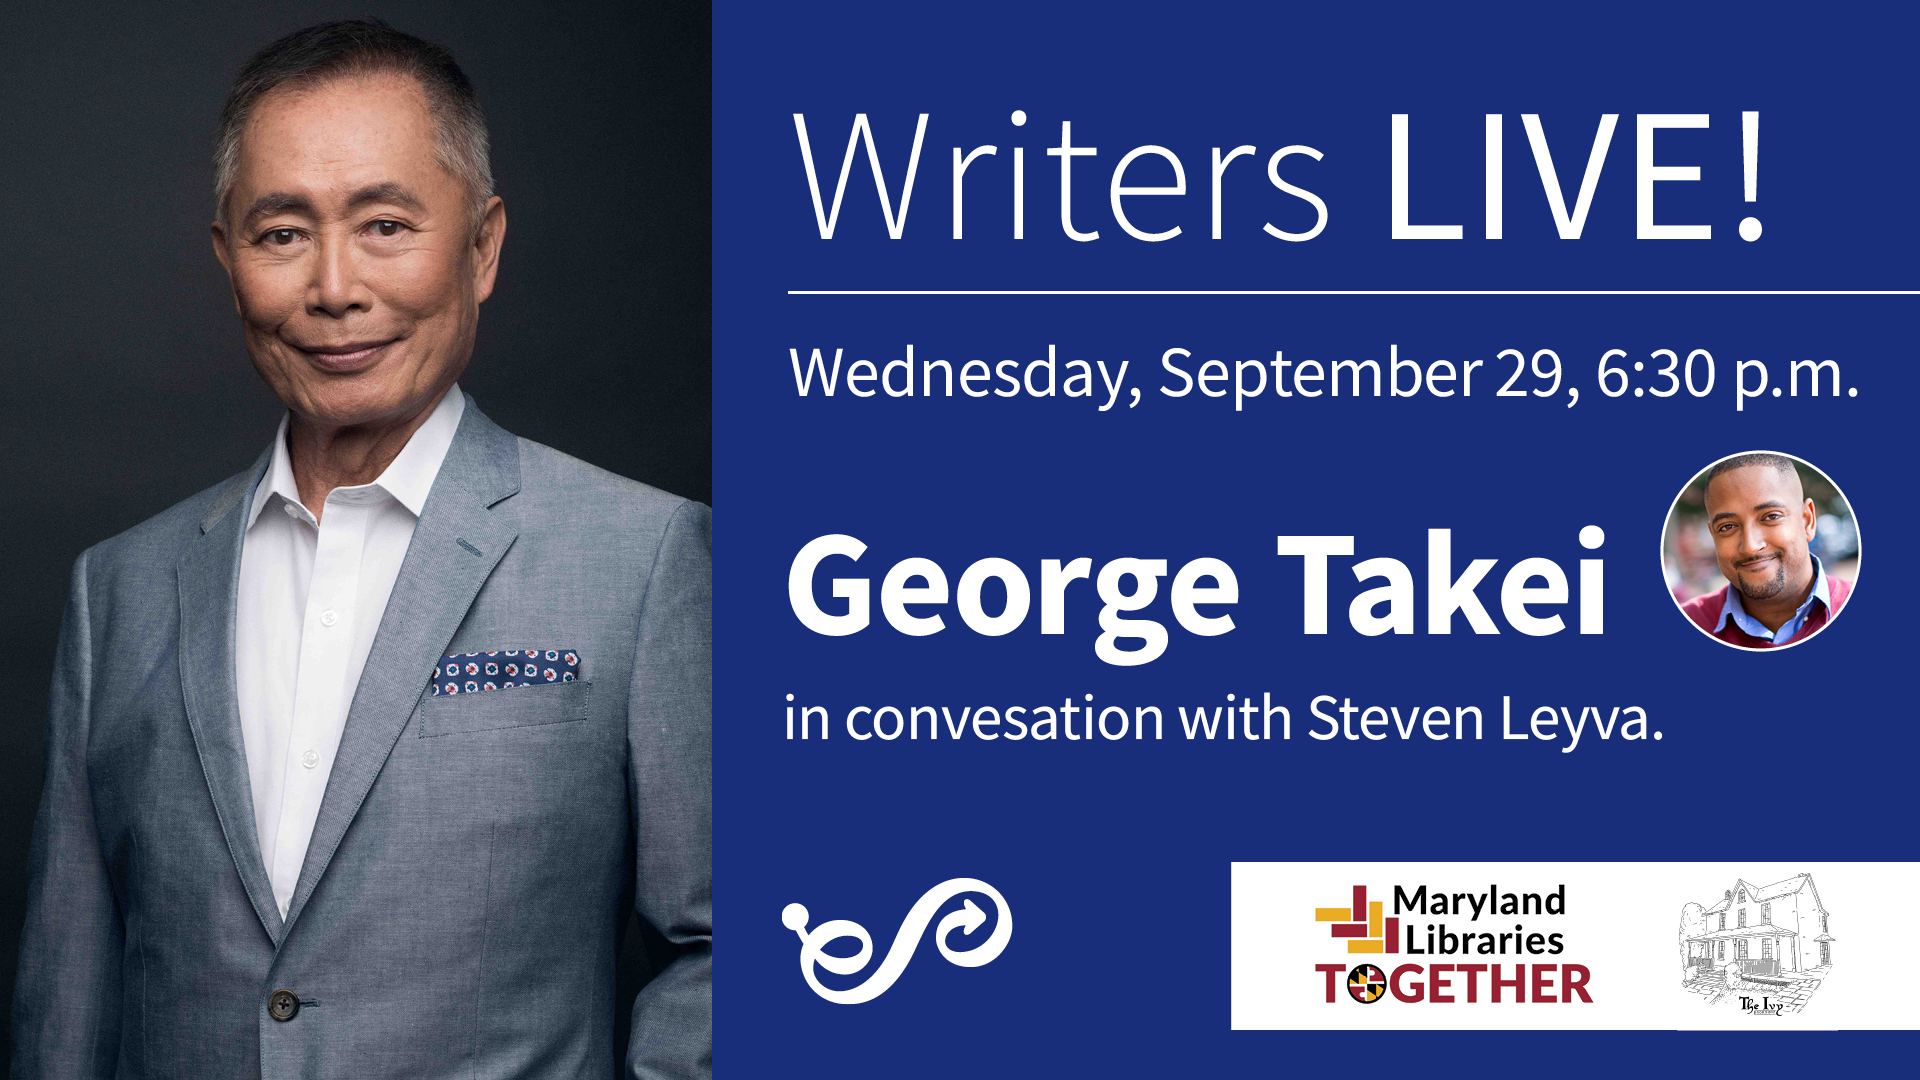 George Takei photo and event graphic